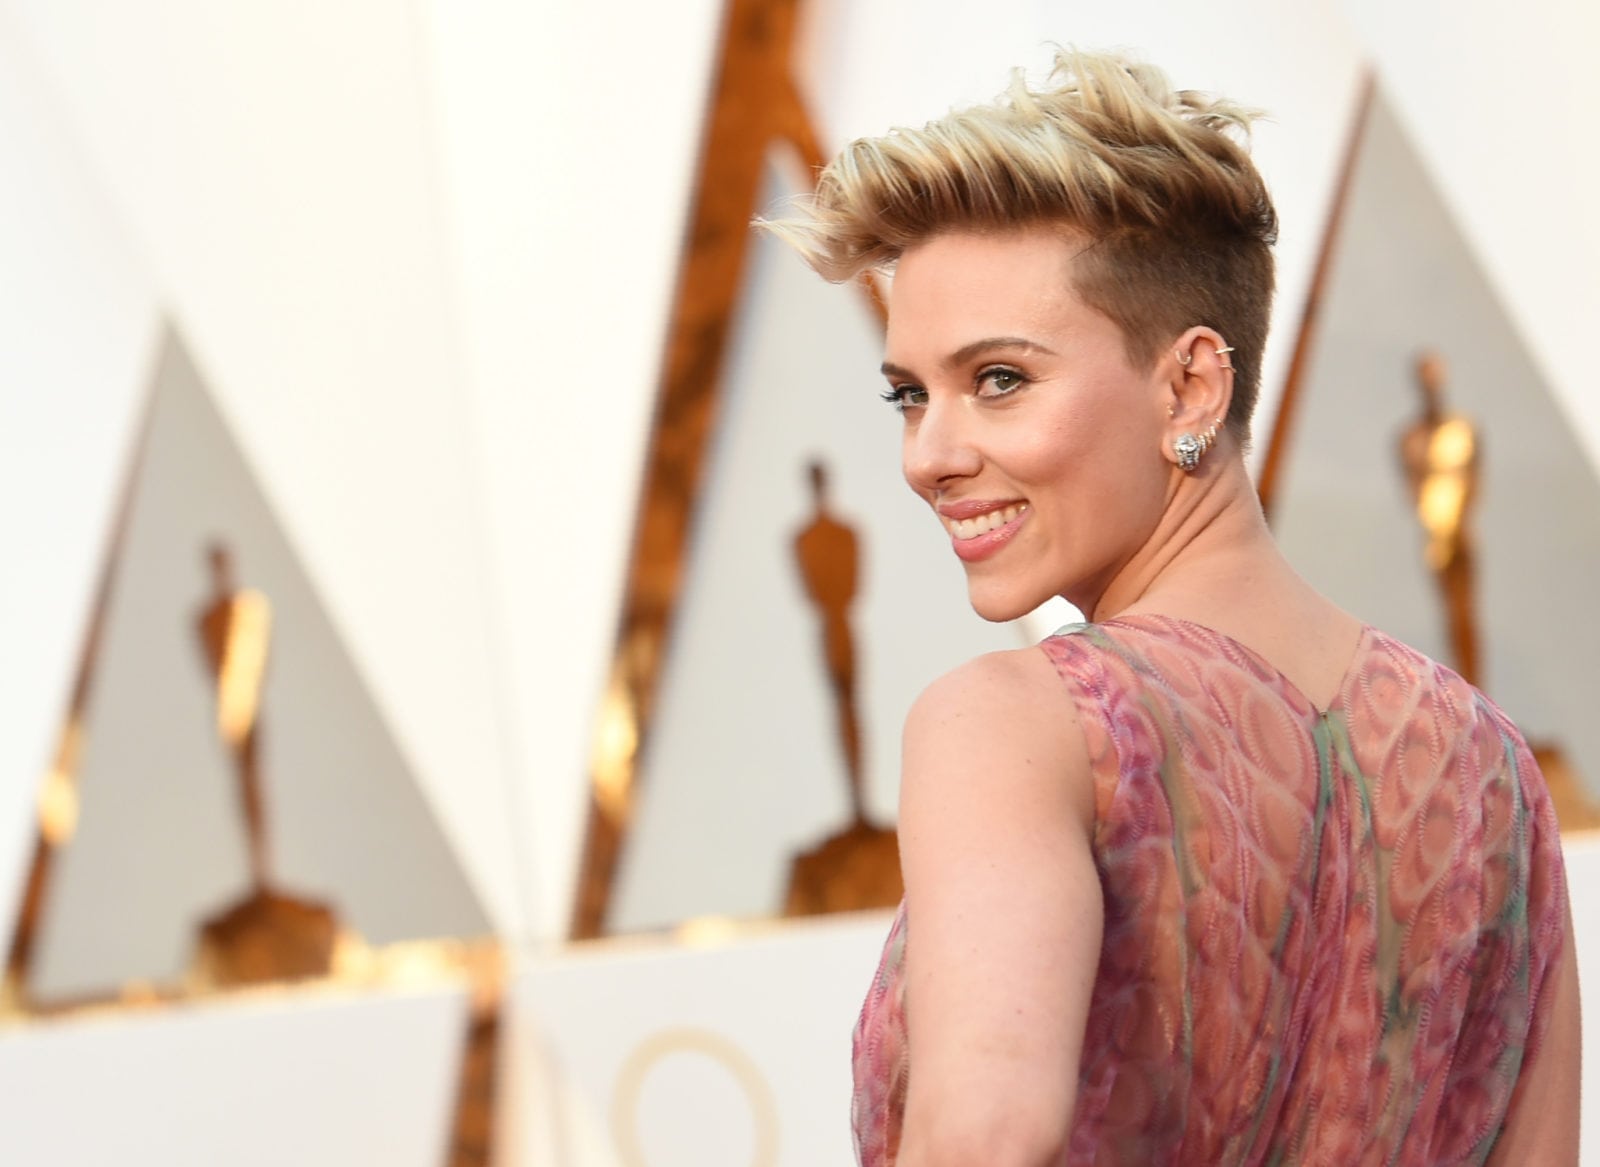 Scarlett Johansson Drops Out Of Rub And Tug After Backlash For Taking Transgender Role Pinknews 